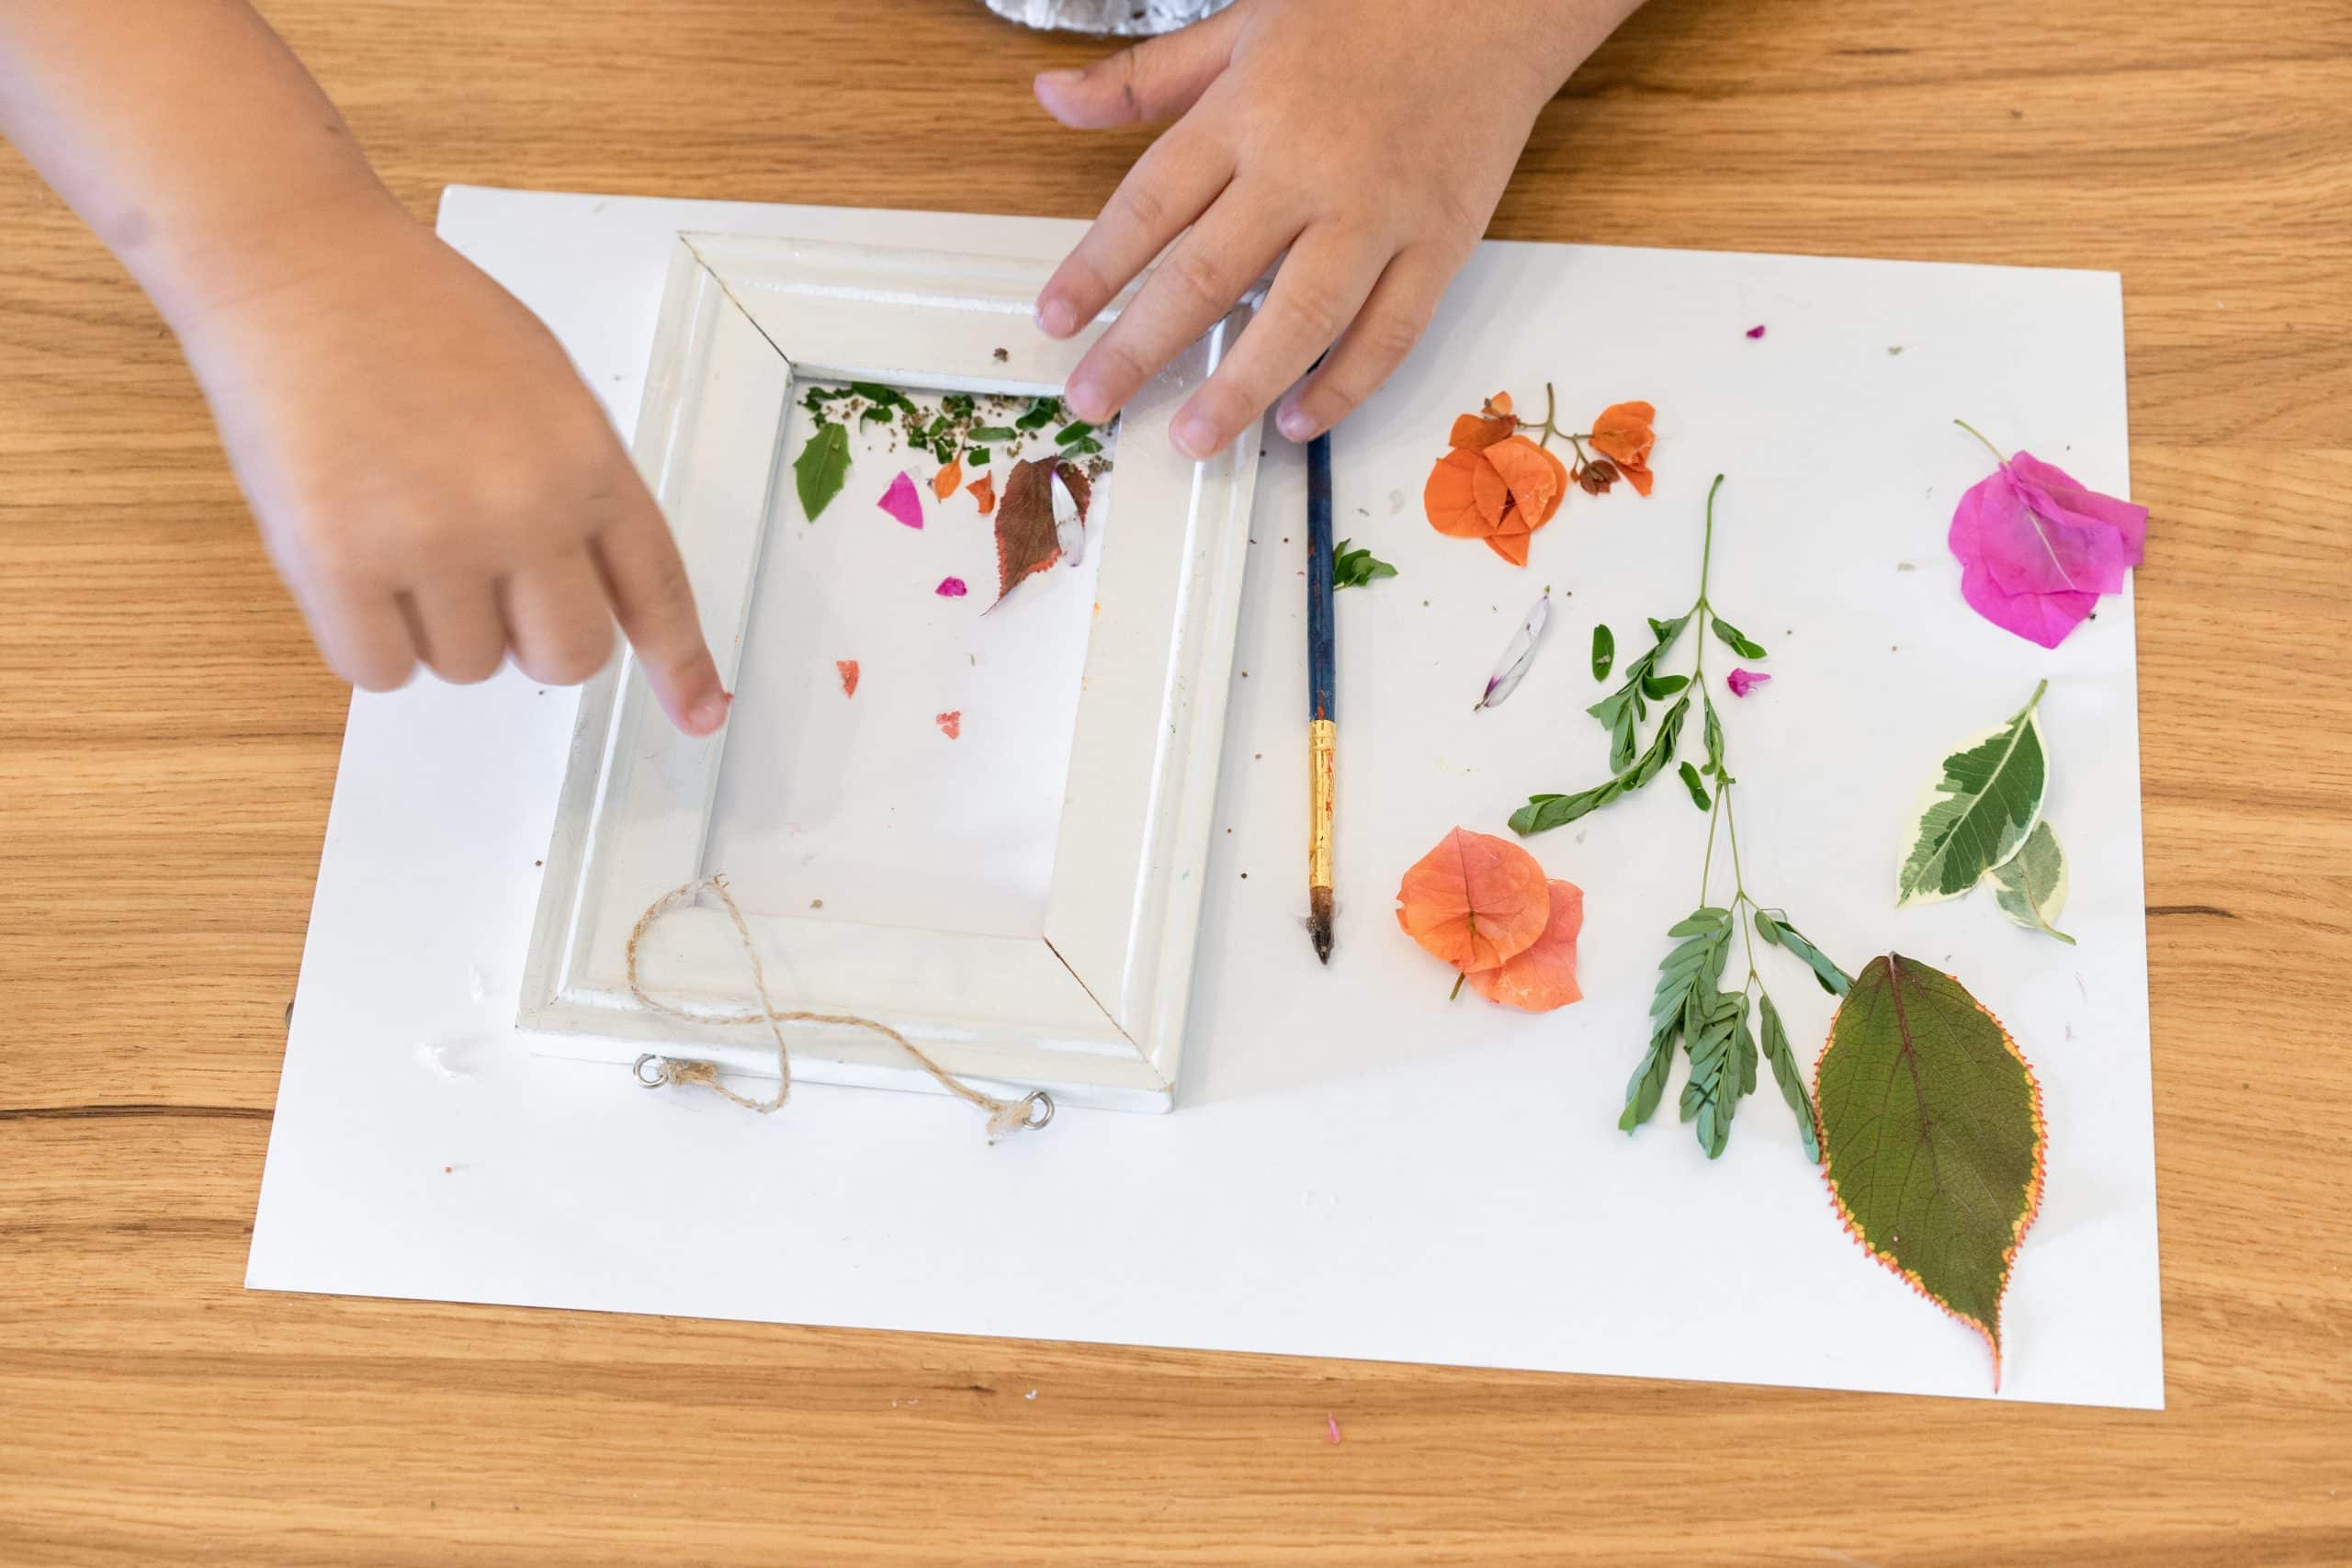 child placing flowers and leaves into a picture frame